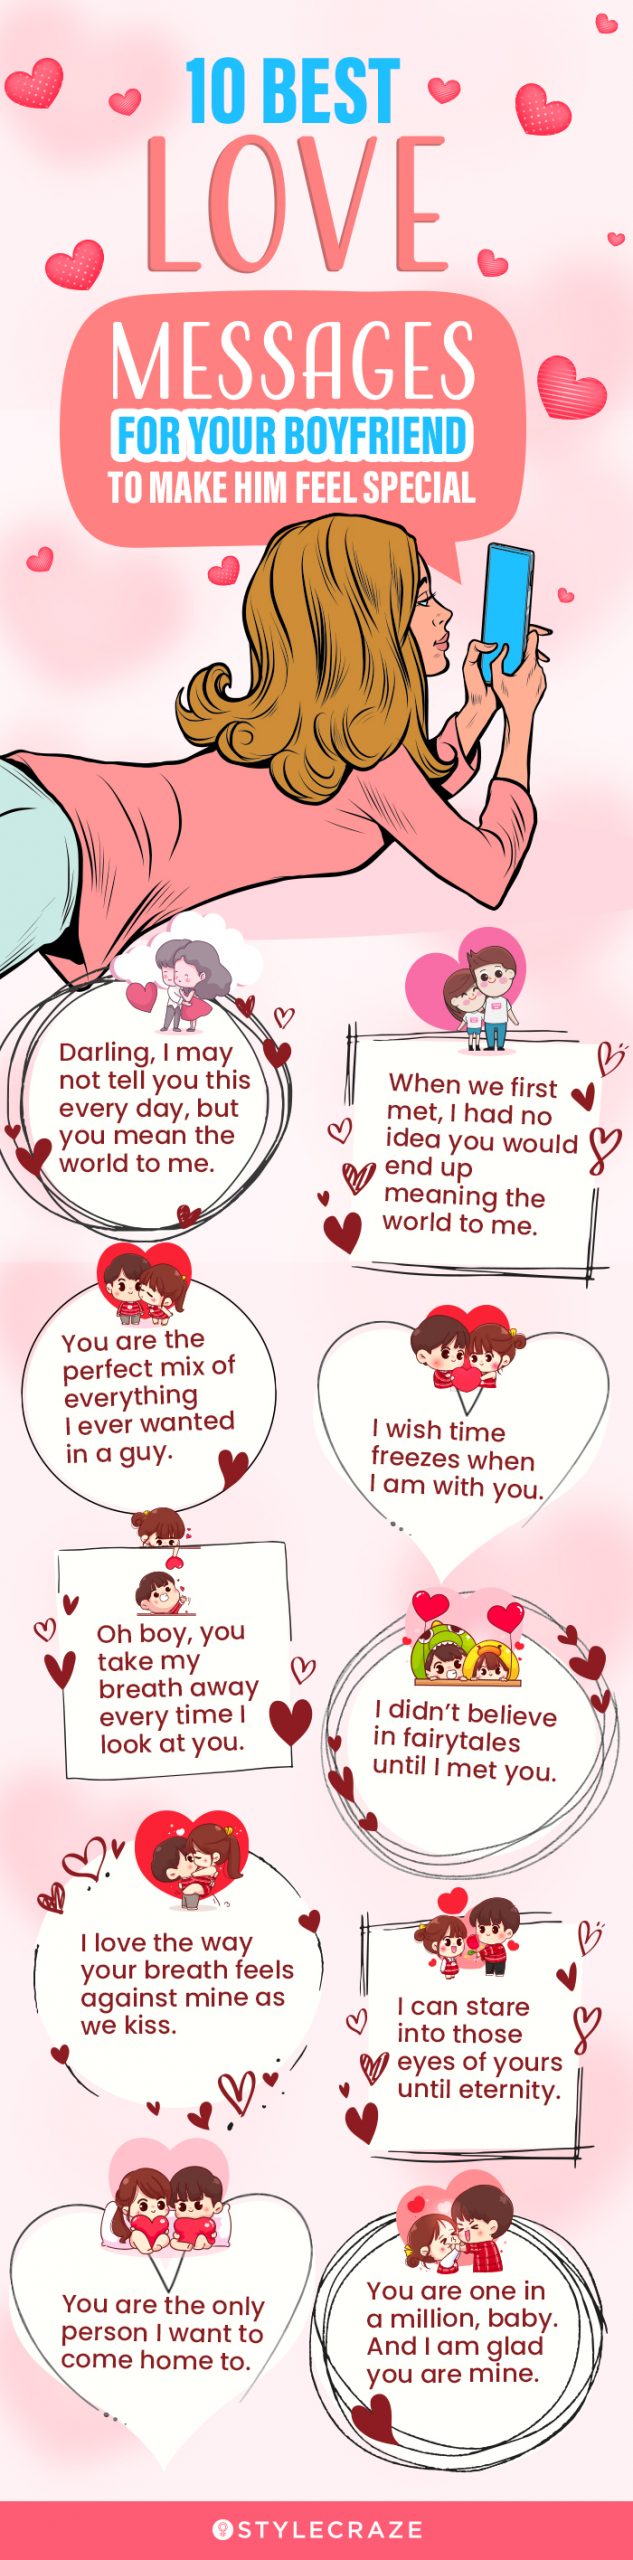 best love messages for your boyfriend to make him feel special (infographic)